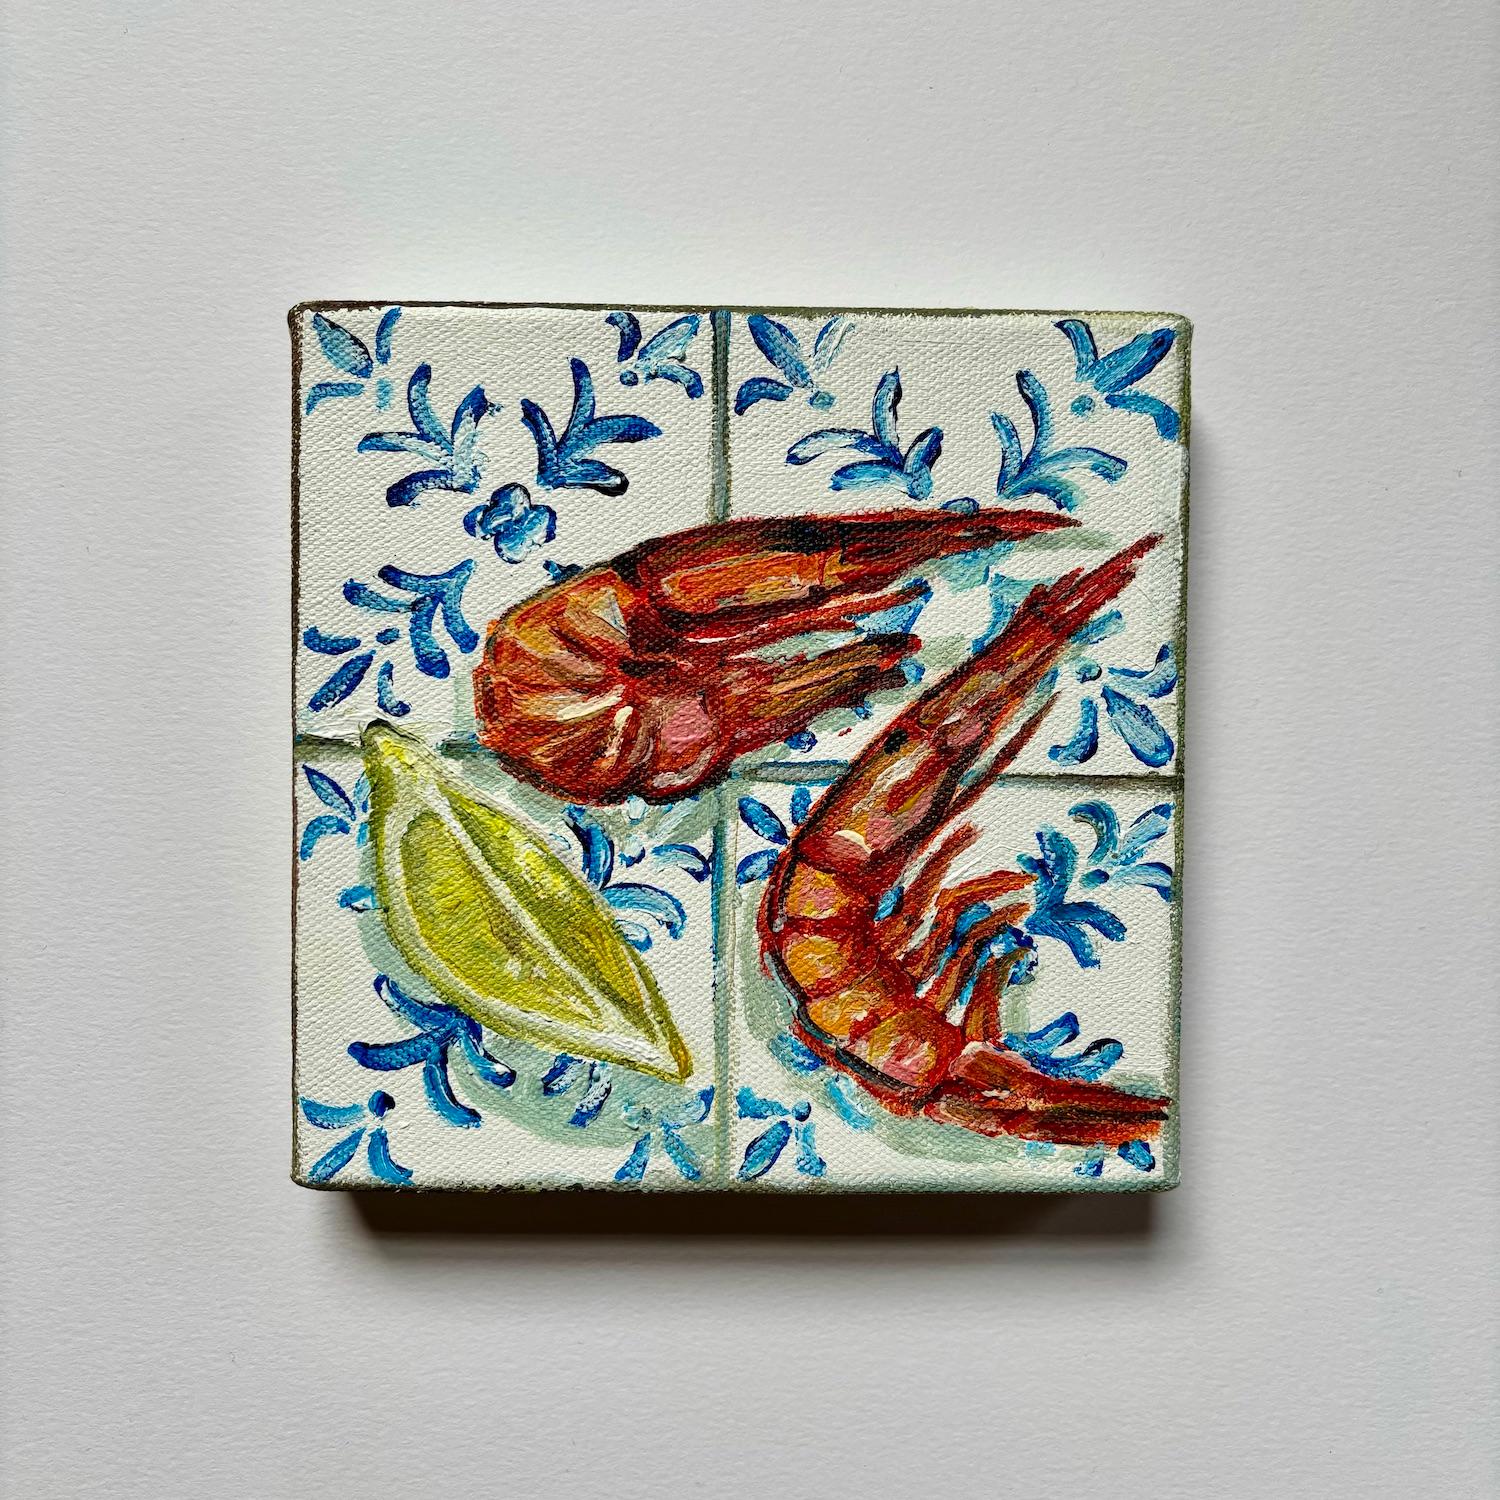 Two Prawns & Lemon Wedge, Original painting, Food art, Seafood, Mediterranean - Contemporary Painting by Pippa Smith